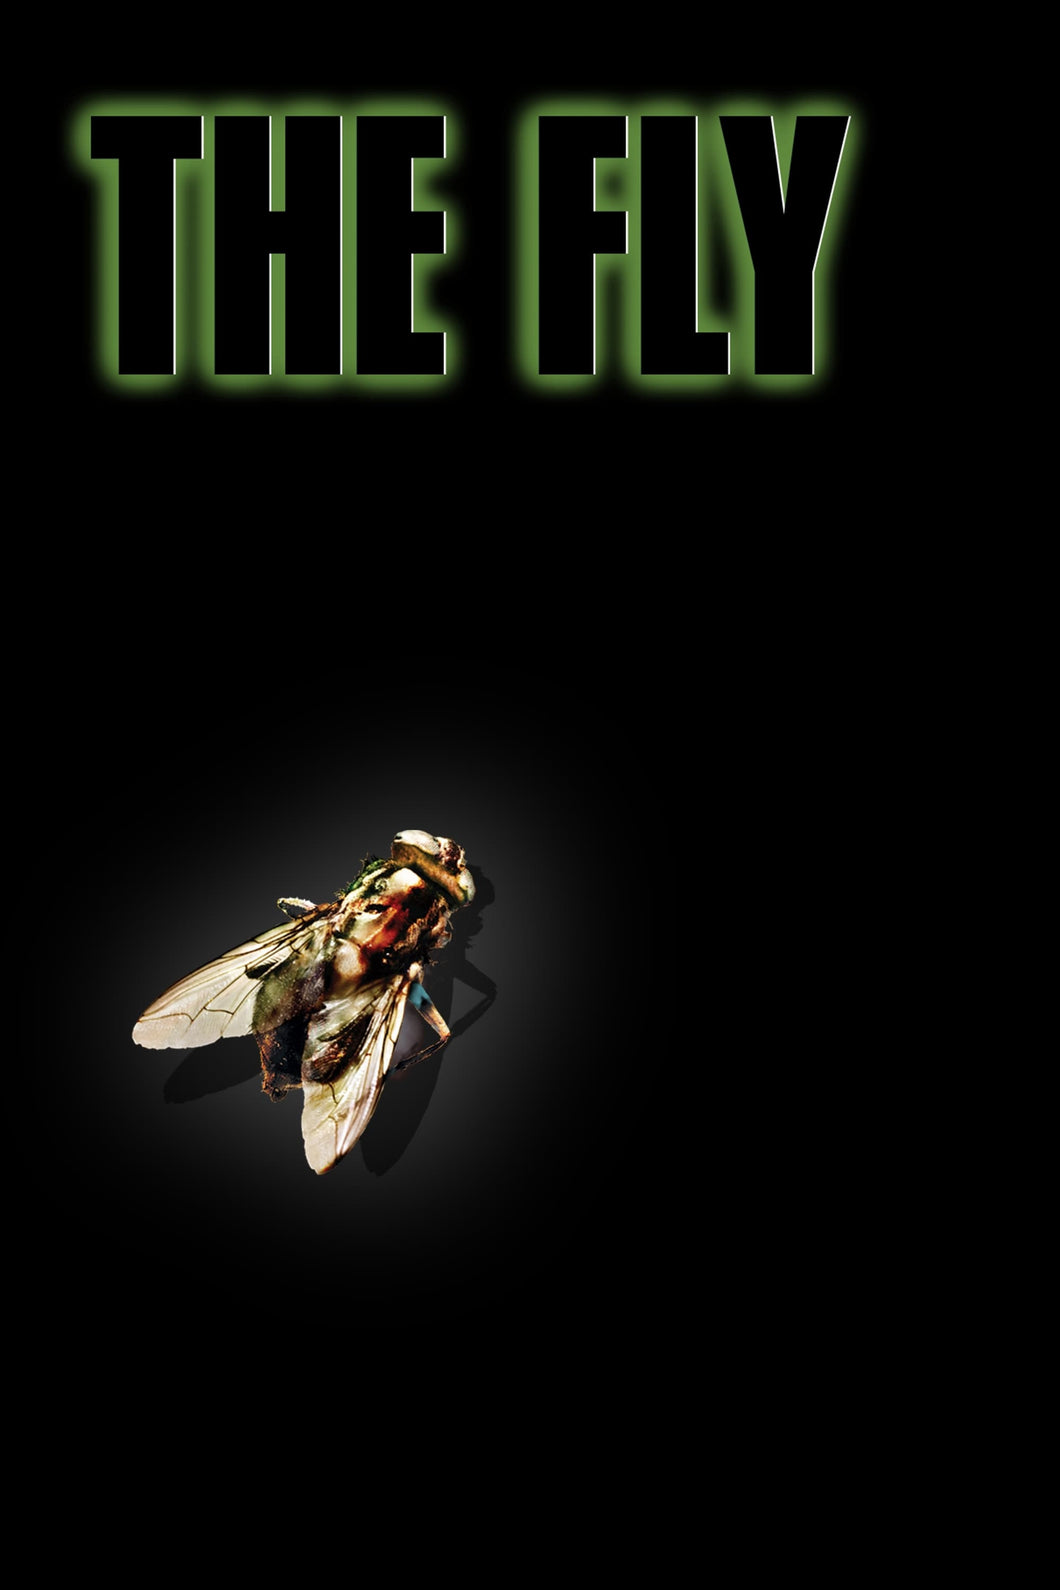 The Fly (1986) Movie Poster Framed or Unframed Glossy Poster Free UK Shipping!!!